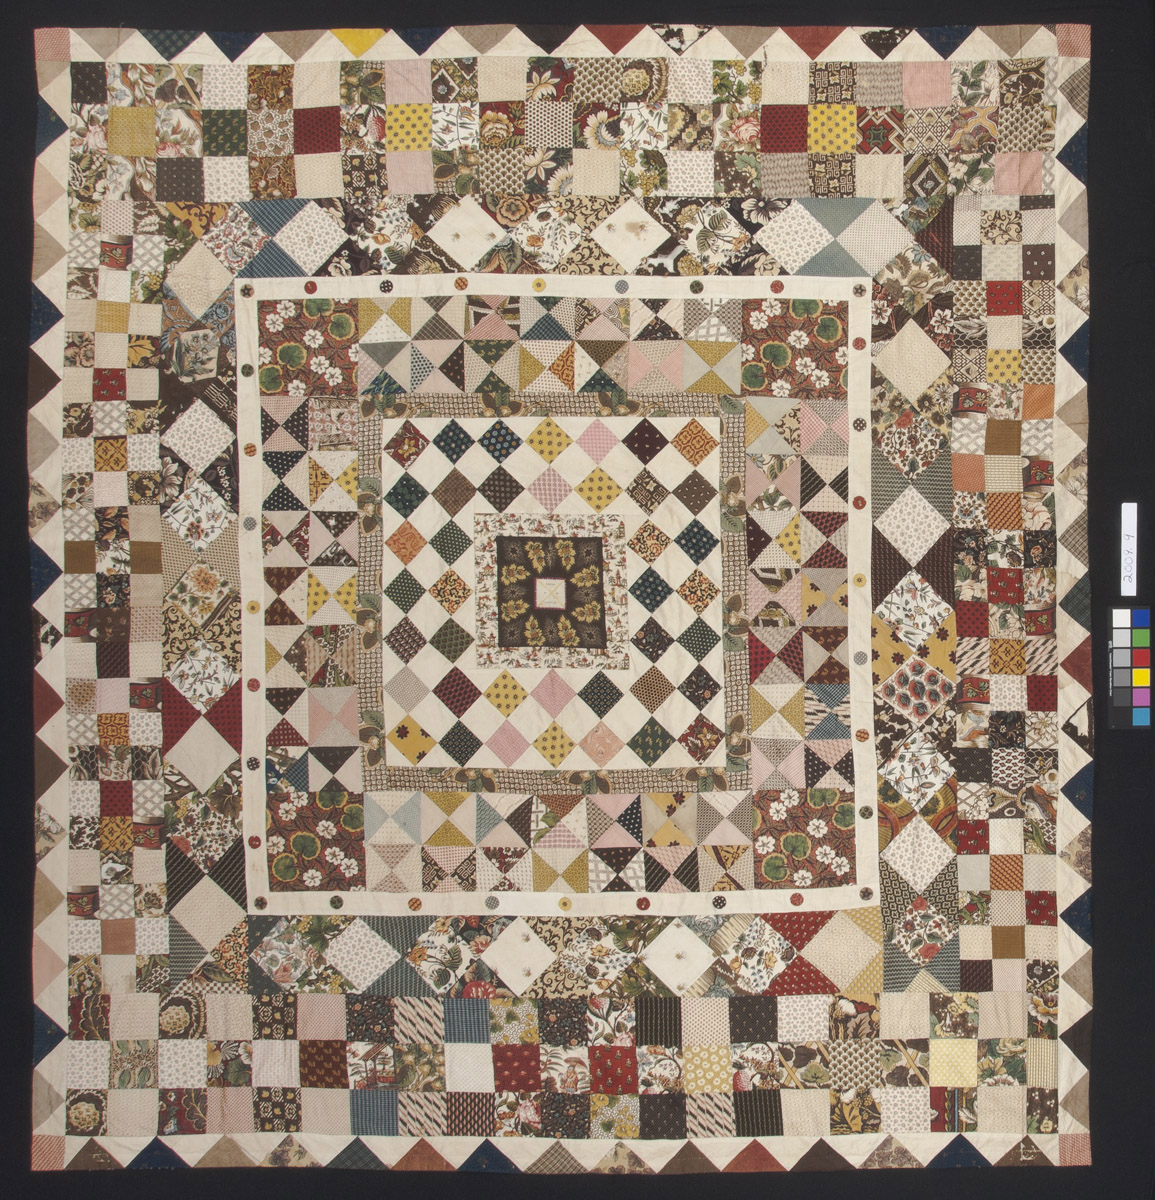 2009.0009 Quilt, view 1